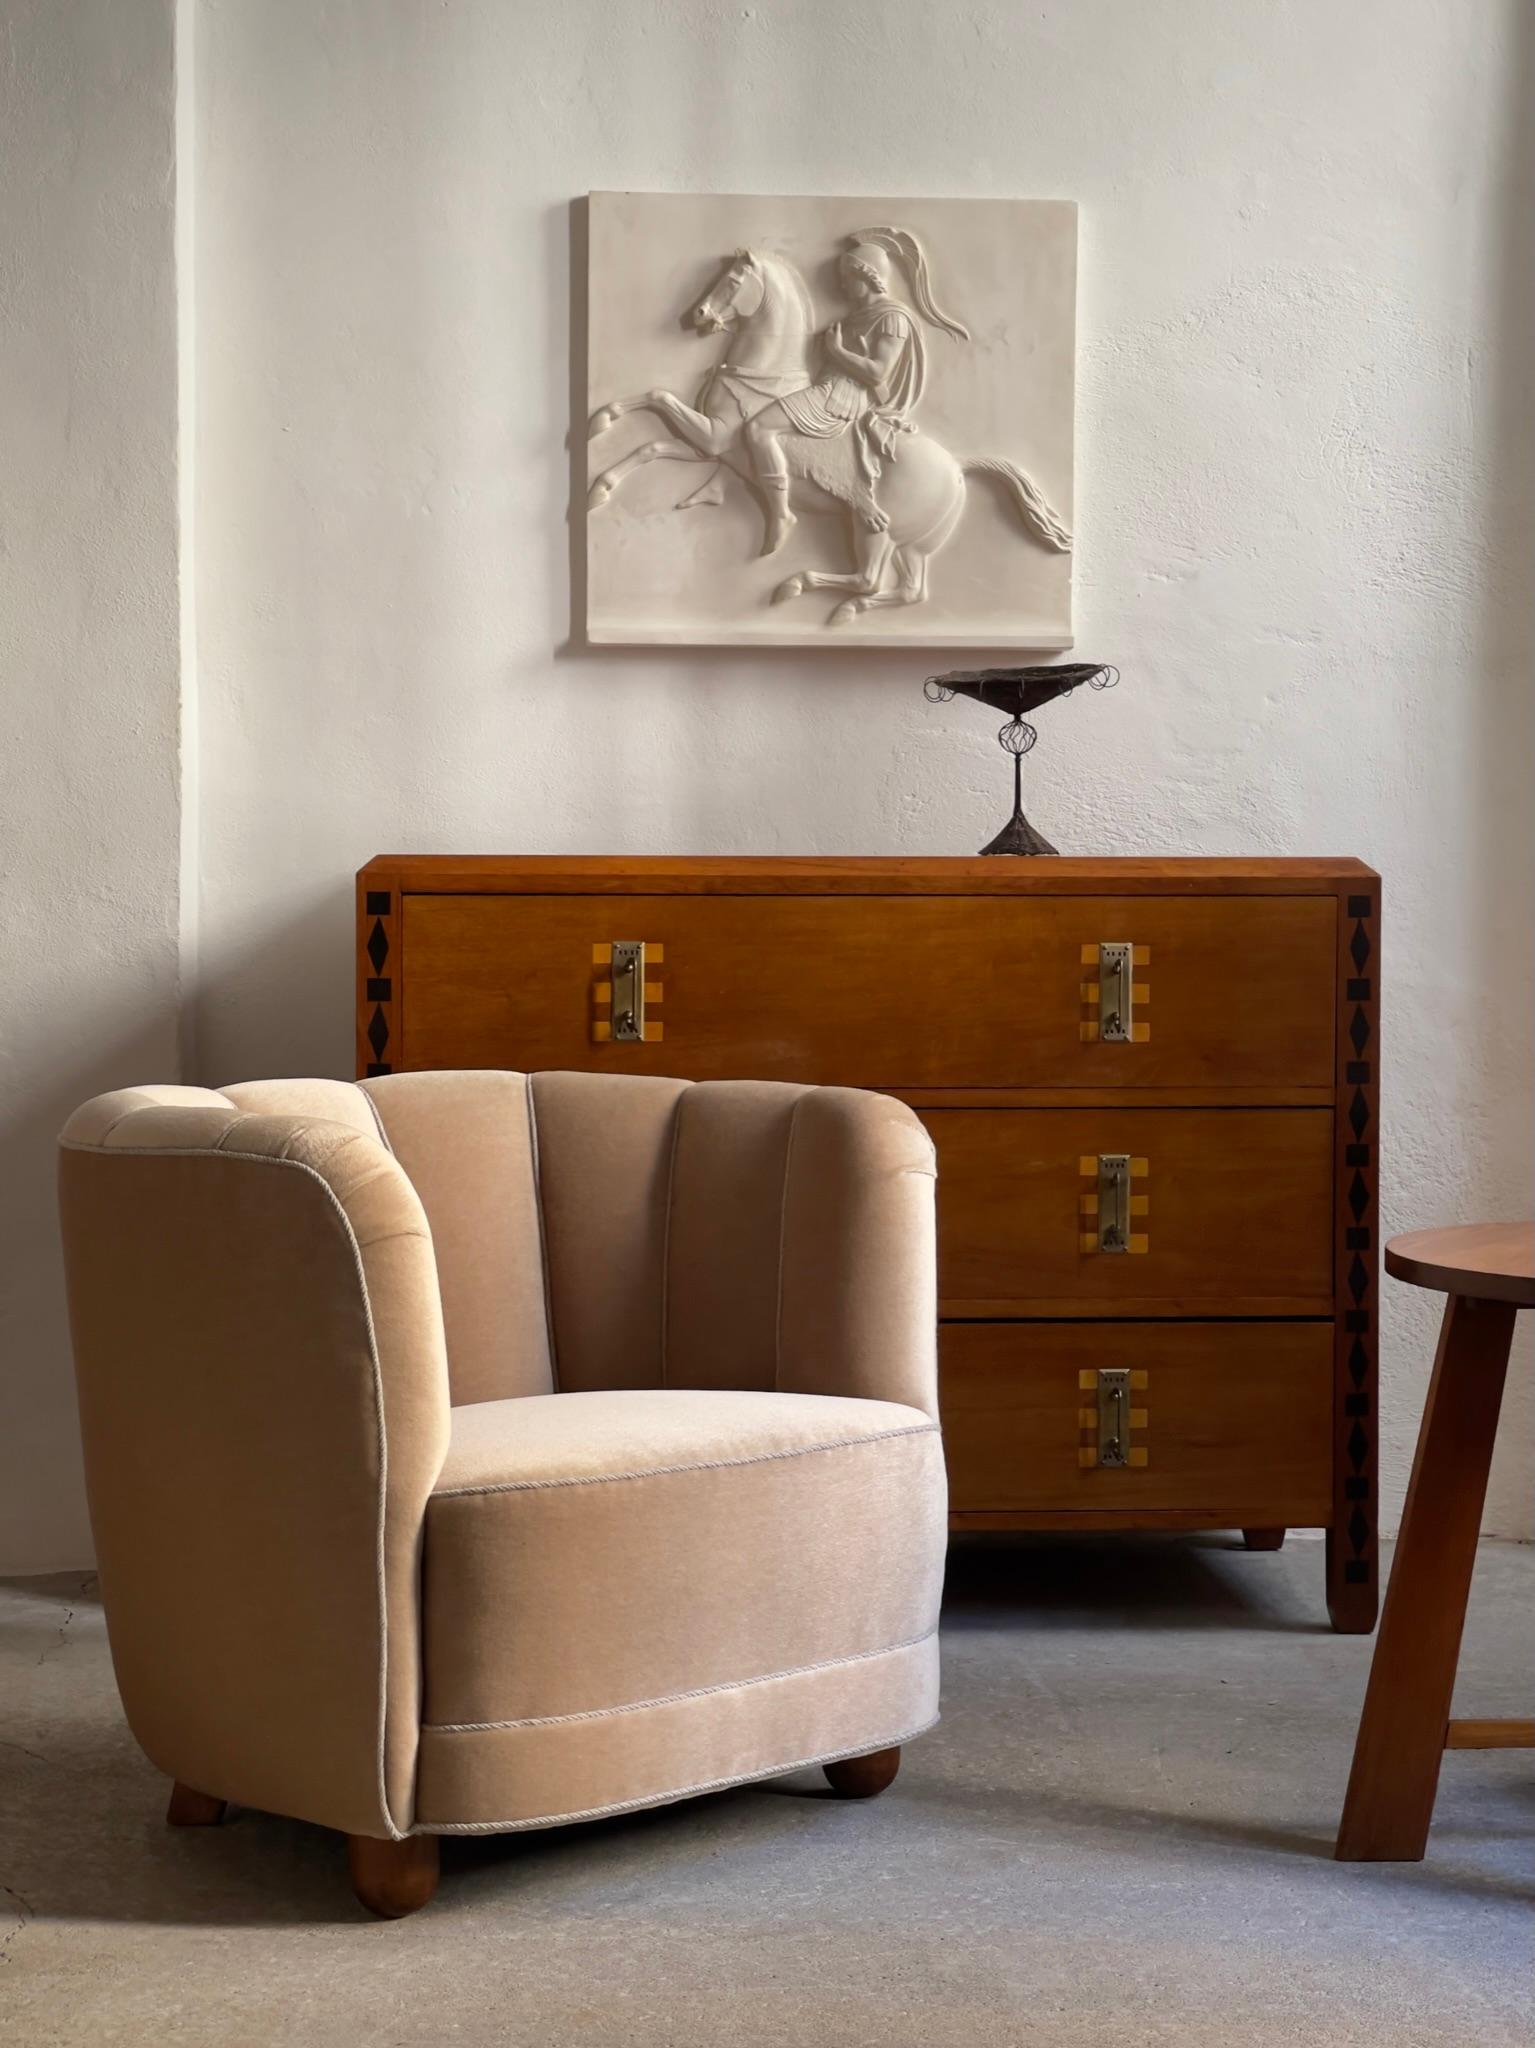 1930s Danish modern easy chair reupholstered in exquisite premium beige mohair and nut brown stained beech legs. 

A very elegant piece executed by skilled danish cabinet maker with harmonious proportions featuring an arrangement of carefully